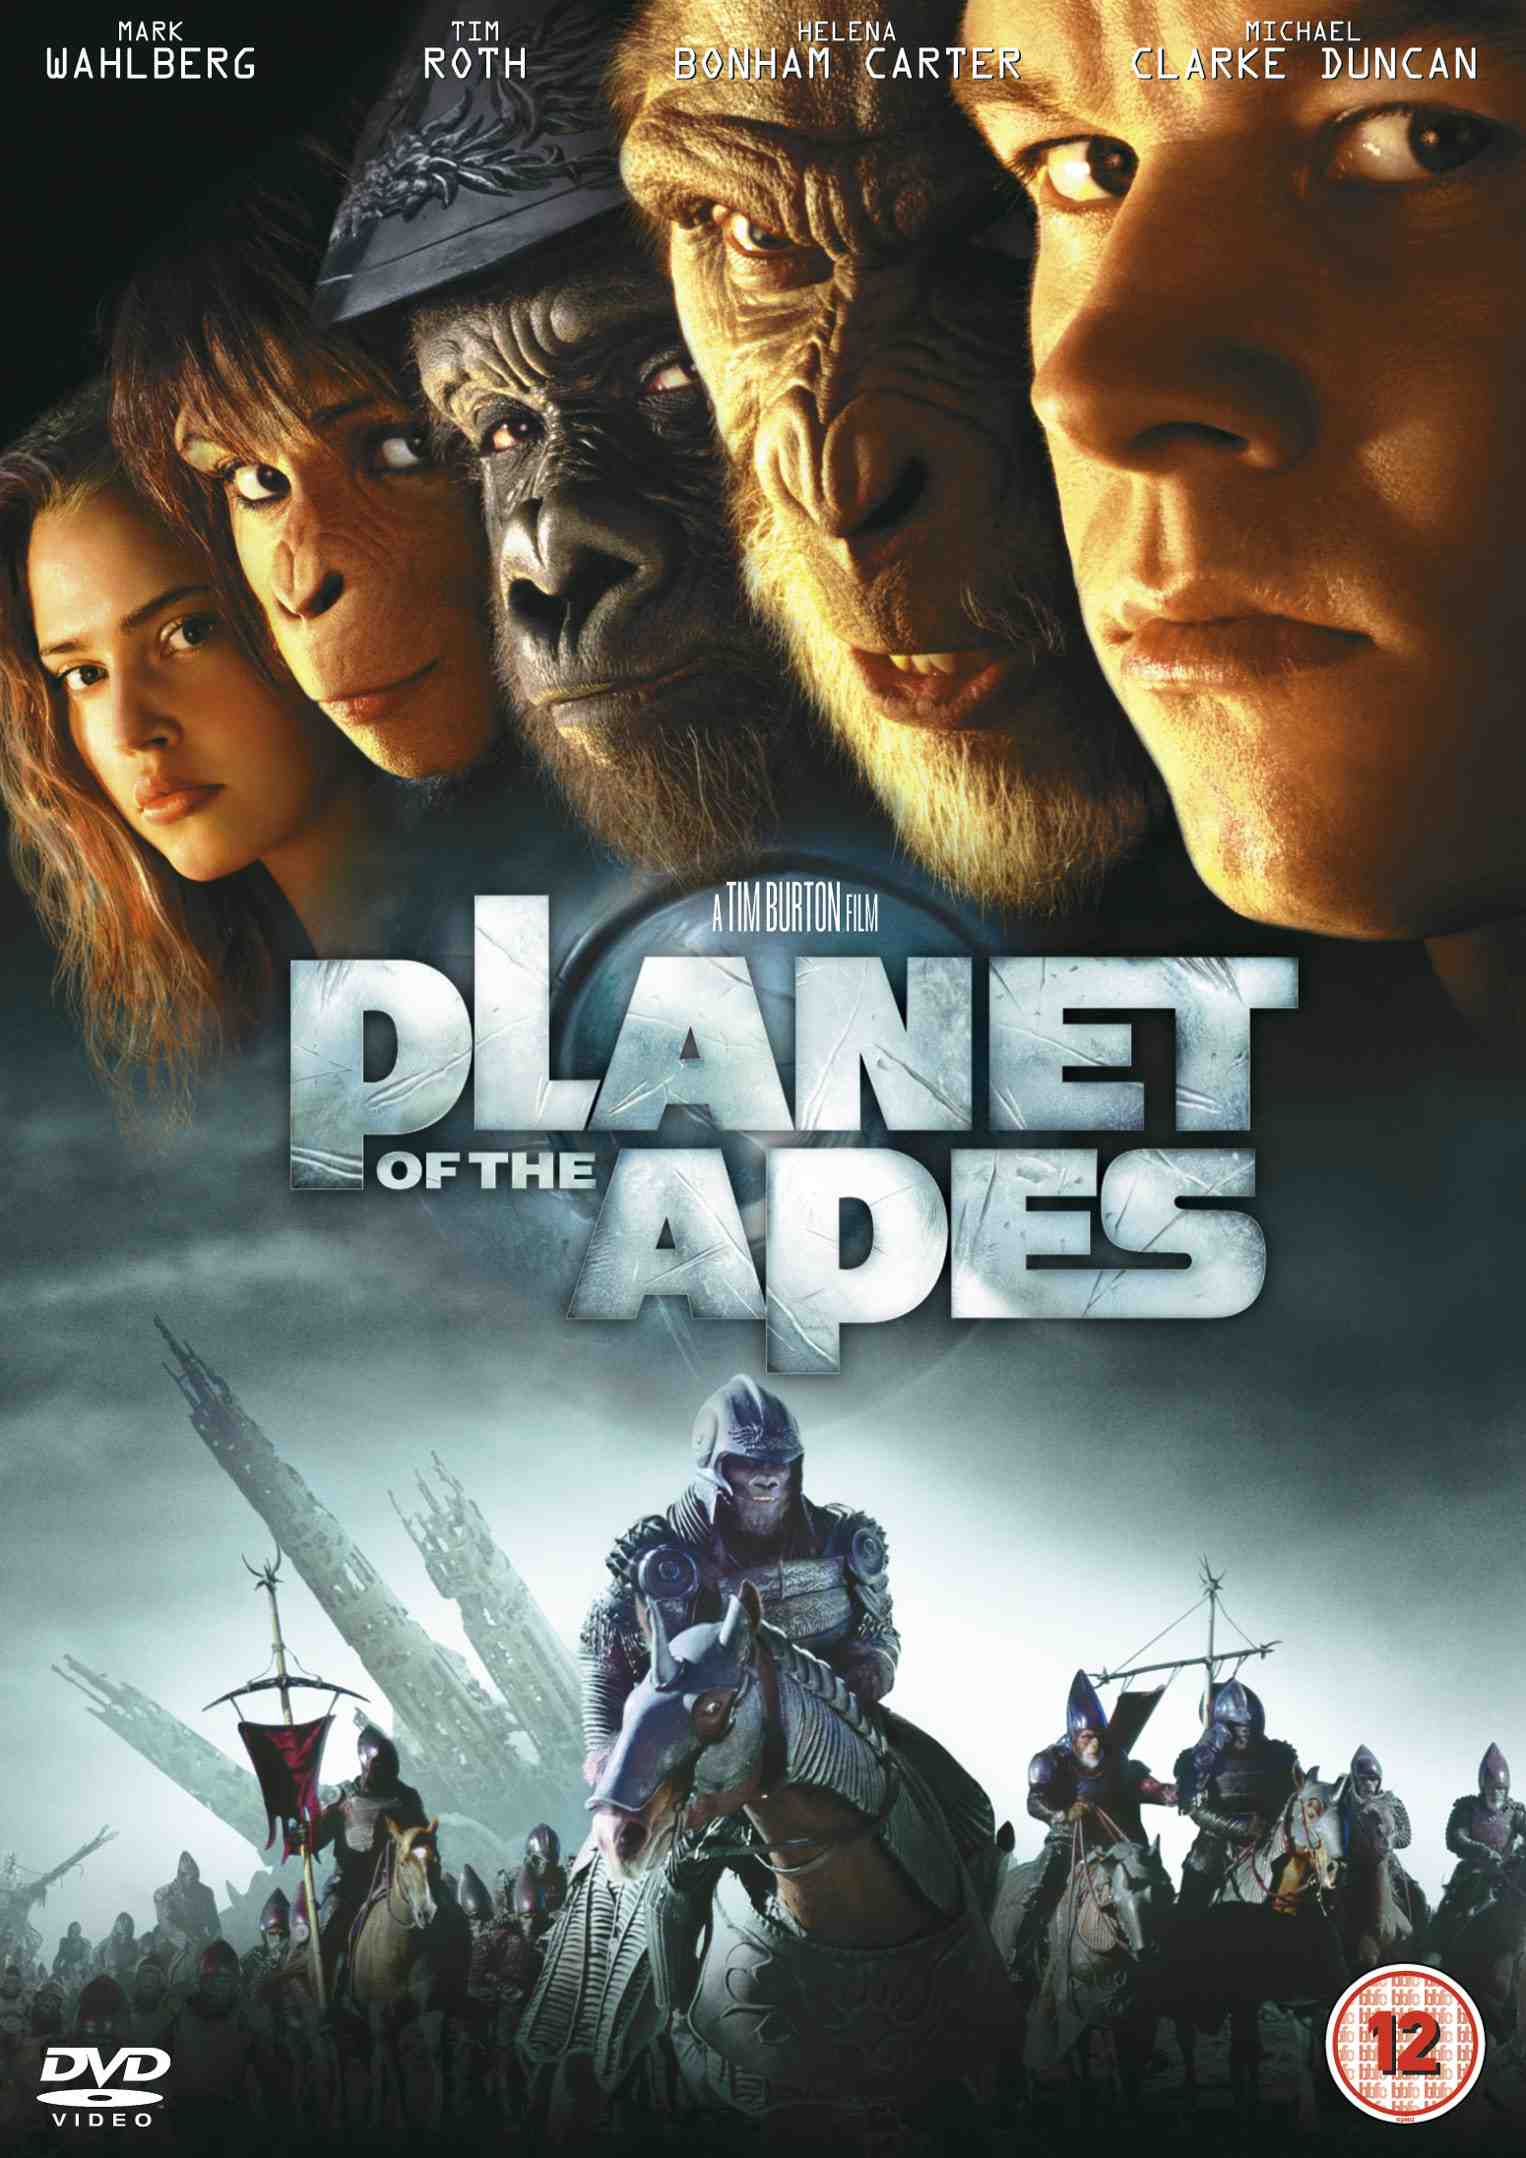 Planet Of The Apes (2001) wallpaper, Movie, HQ Planet Of The Apes (2001) pictureK Wallpaper 2019